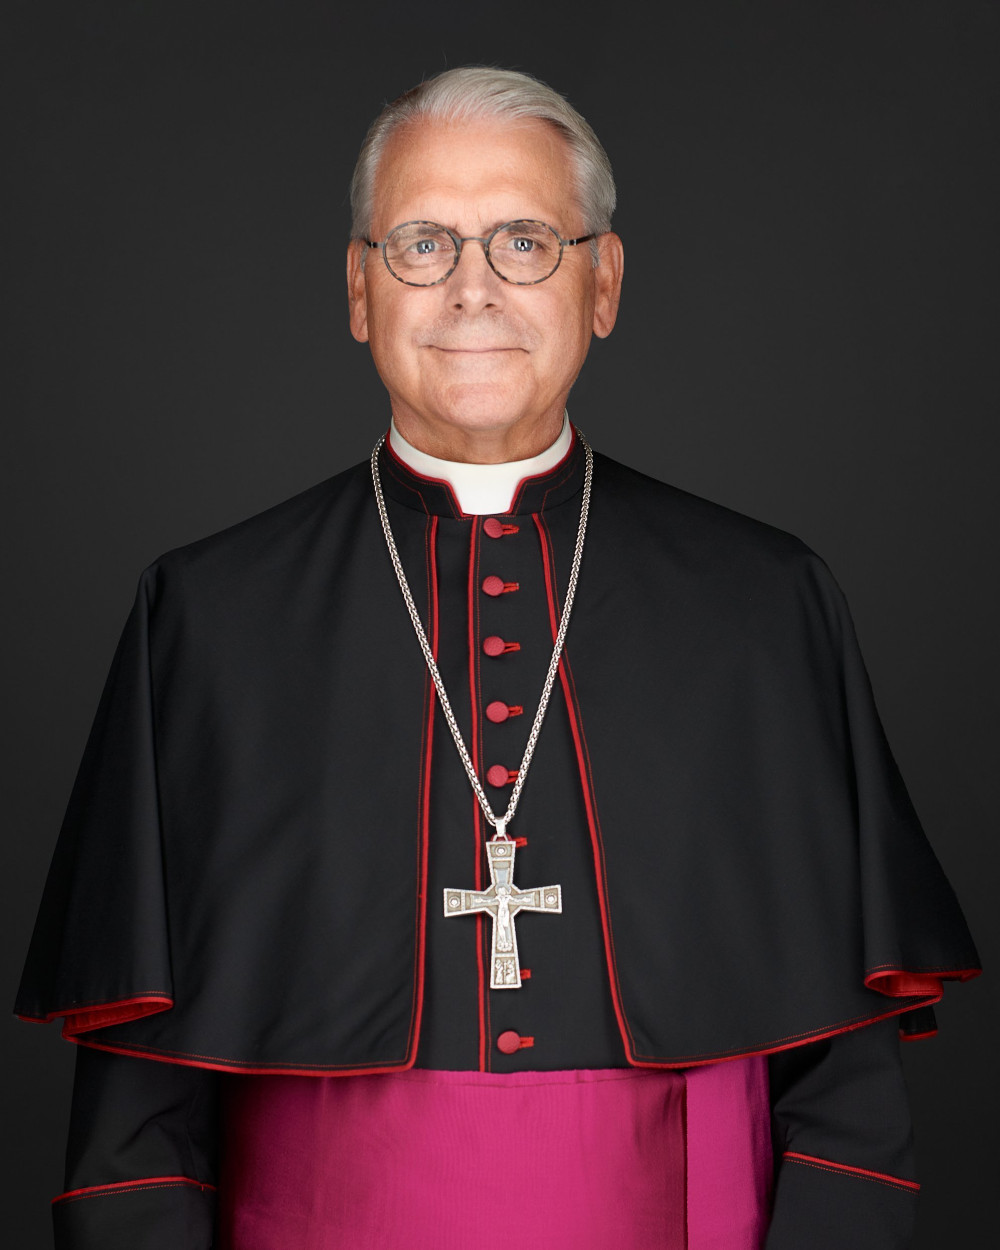 An older white man wears glasses, a bishop's cassock and a pectoral cross